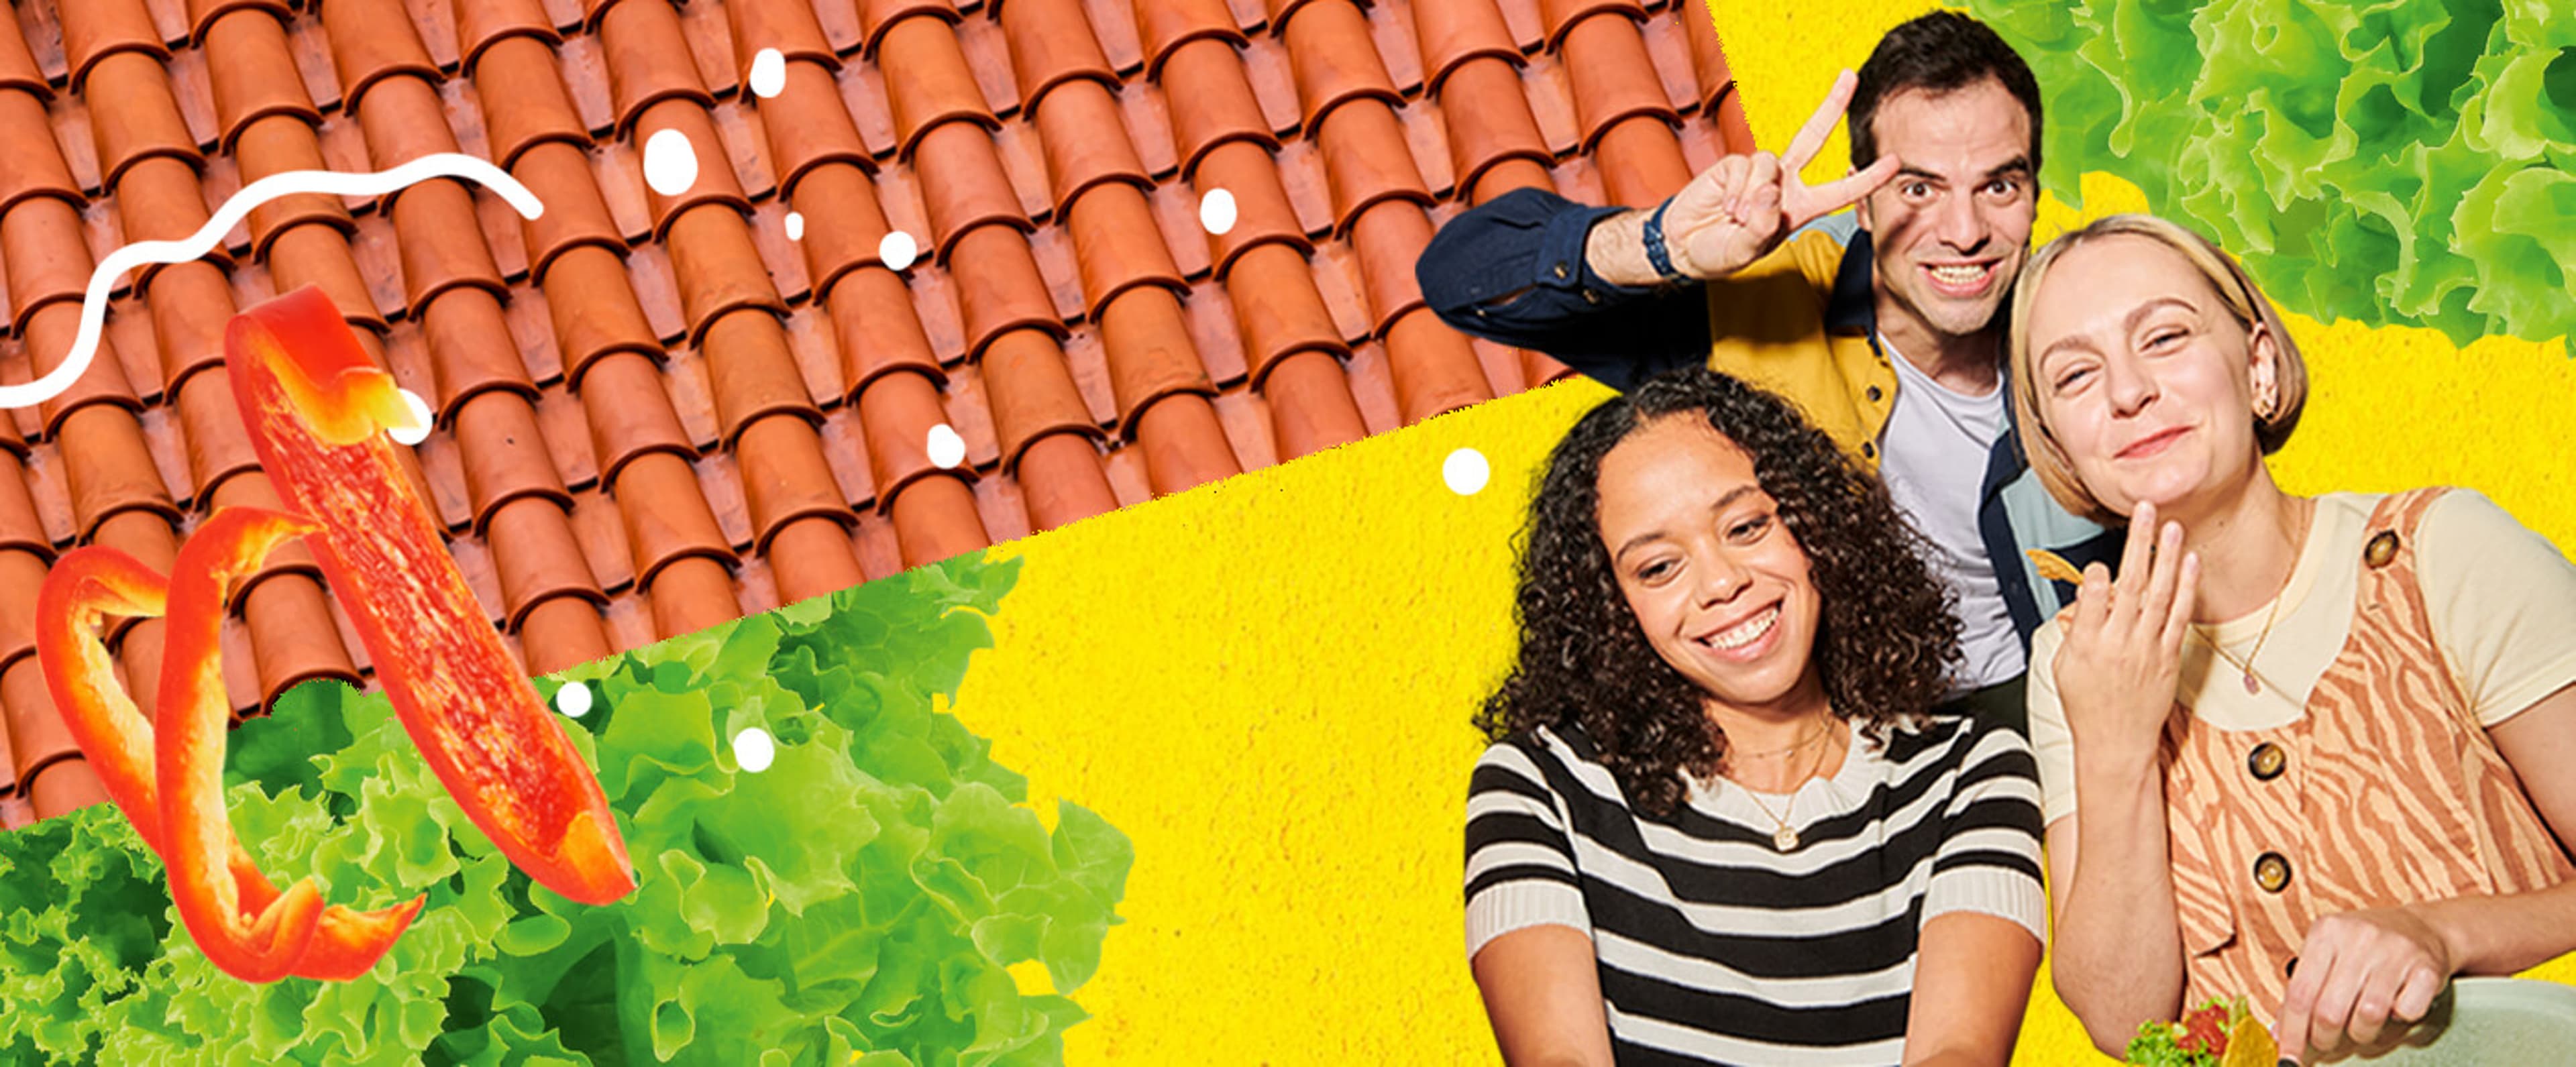 Old El Paso banner image with people and fajitas